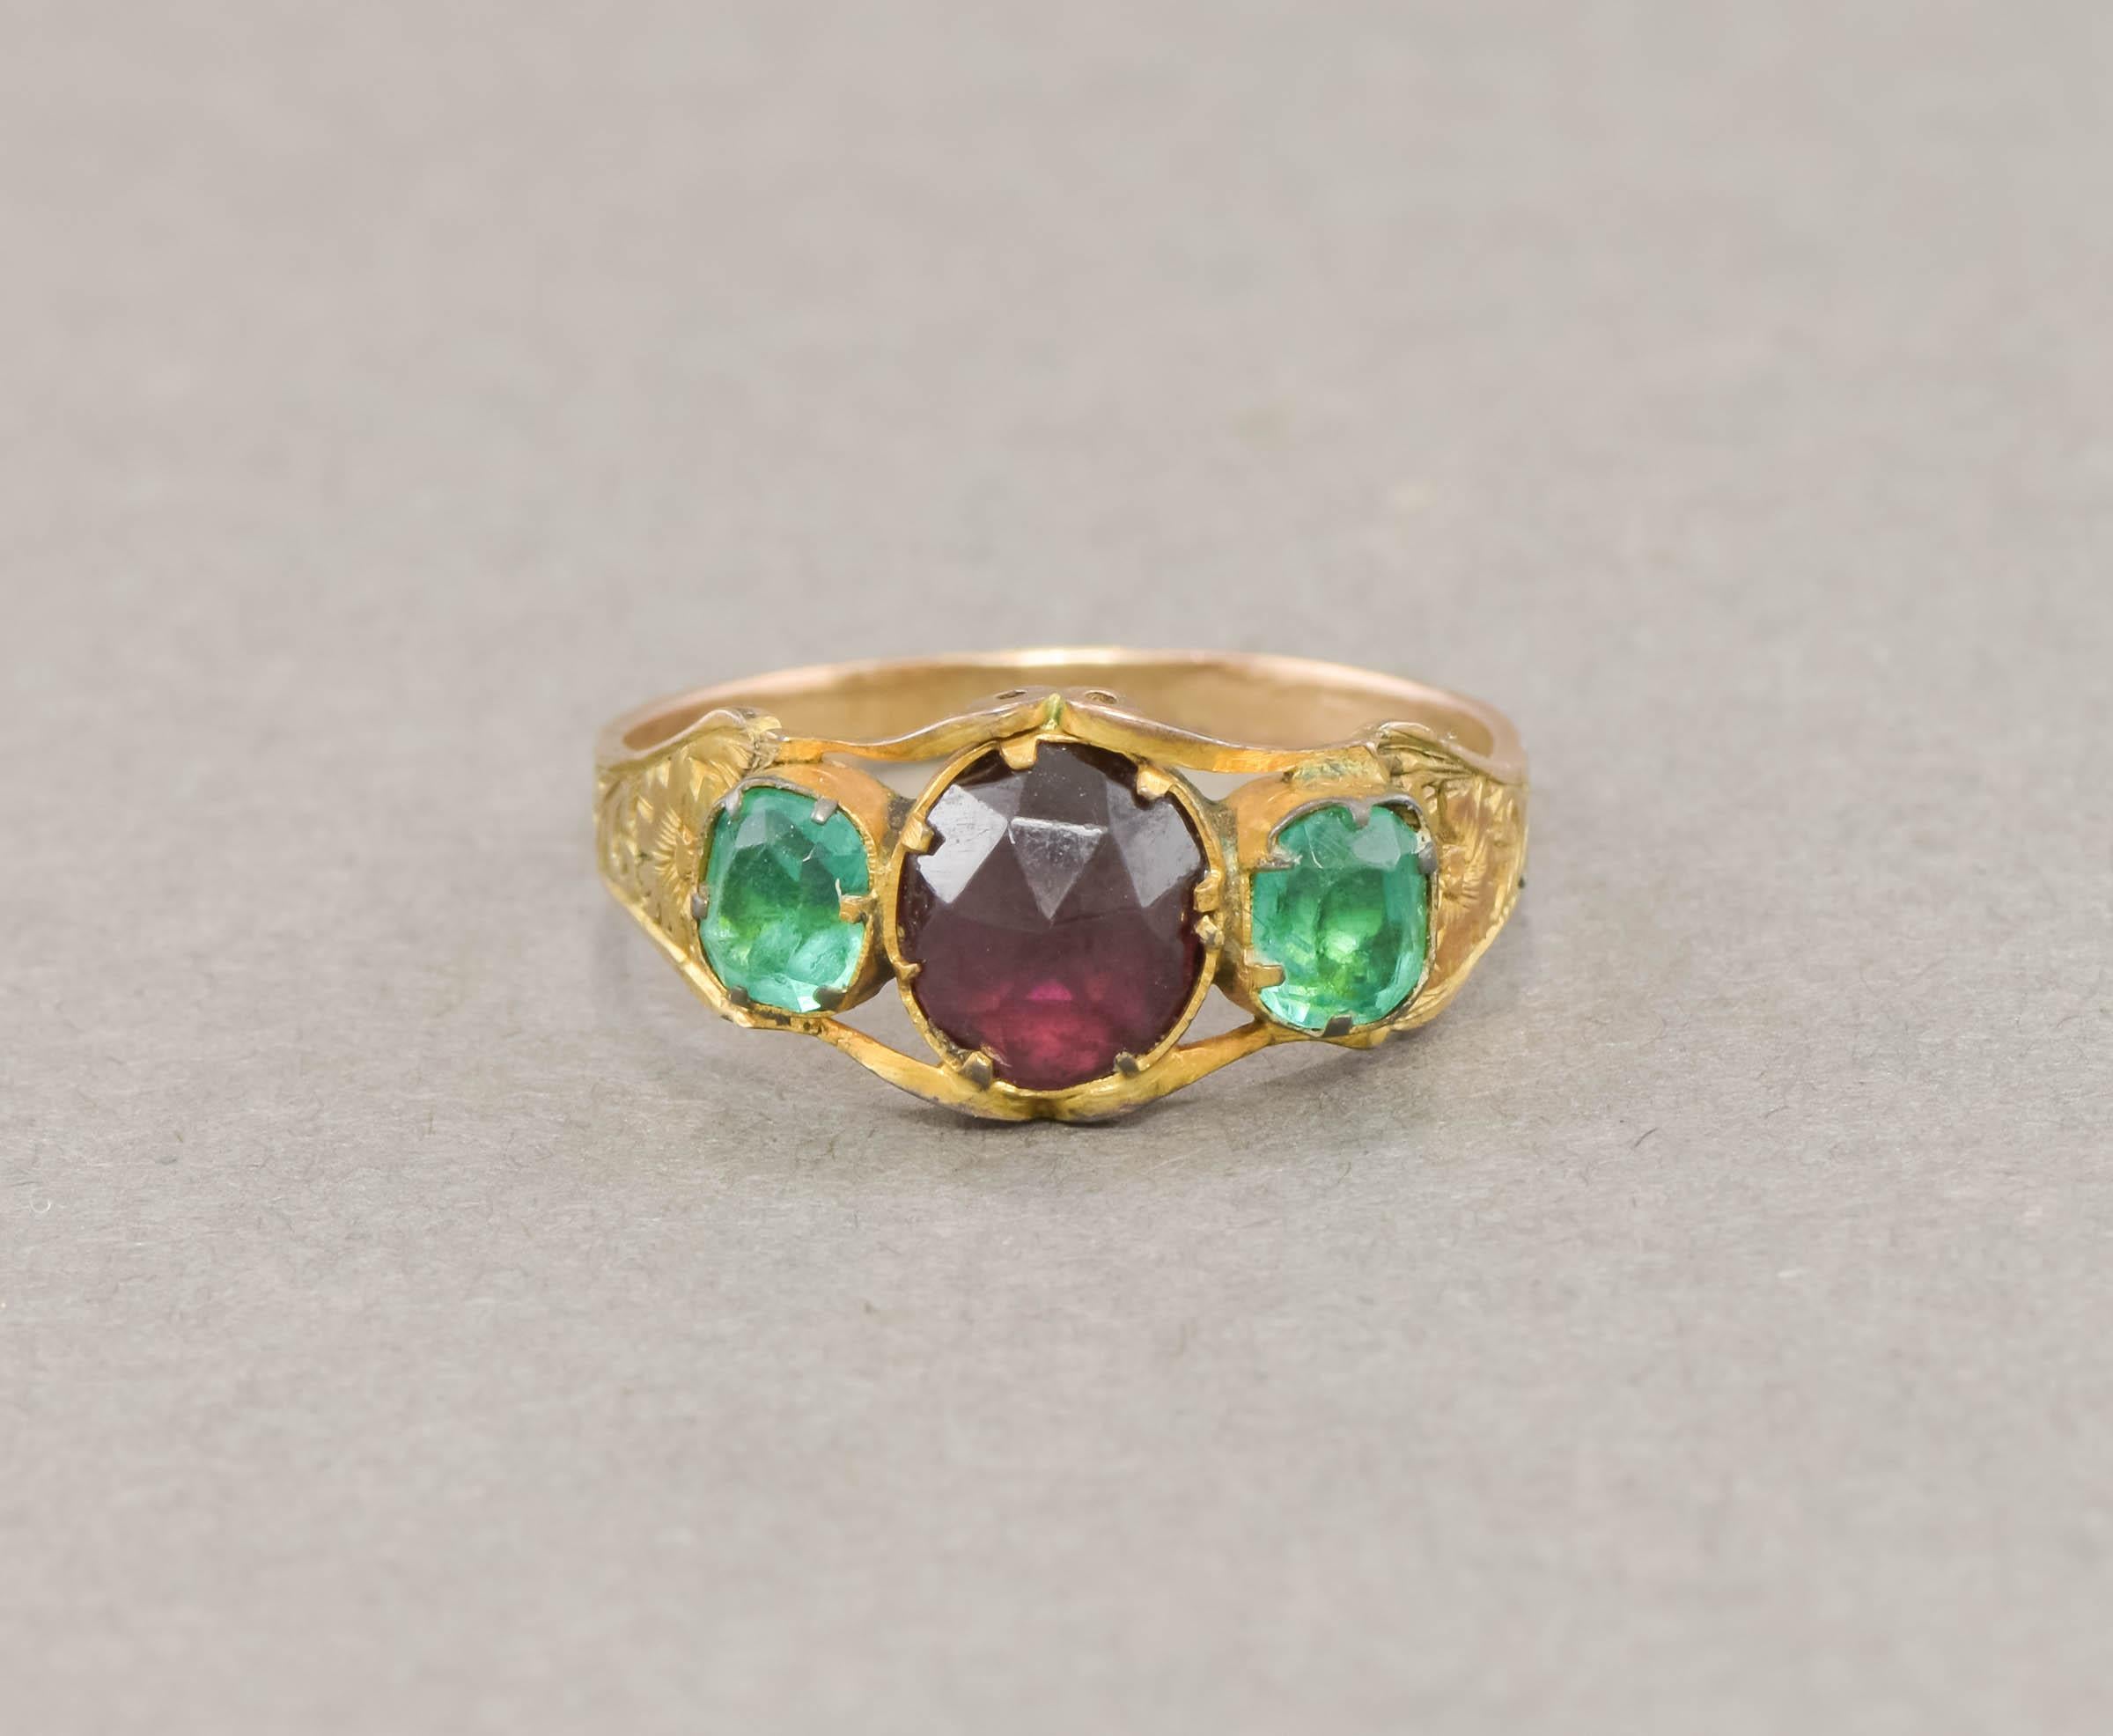 Wonderful color & glow combine with intricate floral engraving in this dainty antique garnet and paste ring. It is estimated to date to the 1850's.

Crafted of gold testing around 9K (with a bloomed/gilded finish), the ring features an elegant three